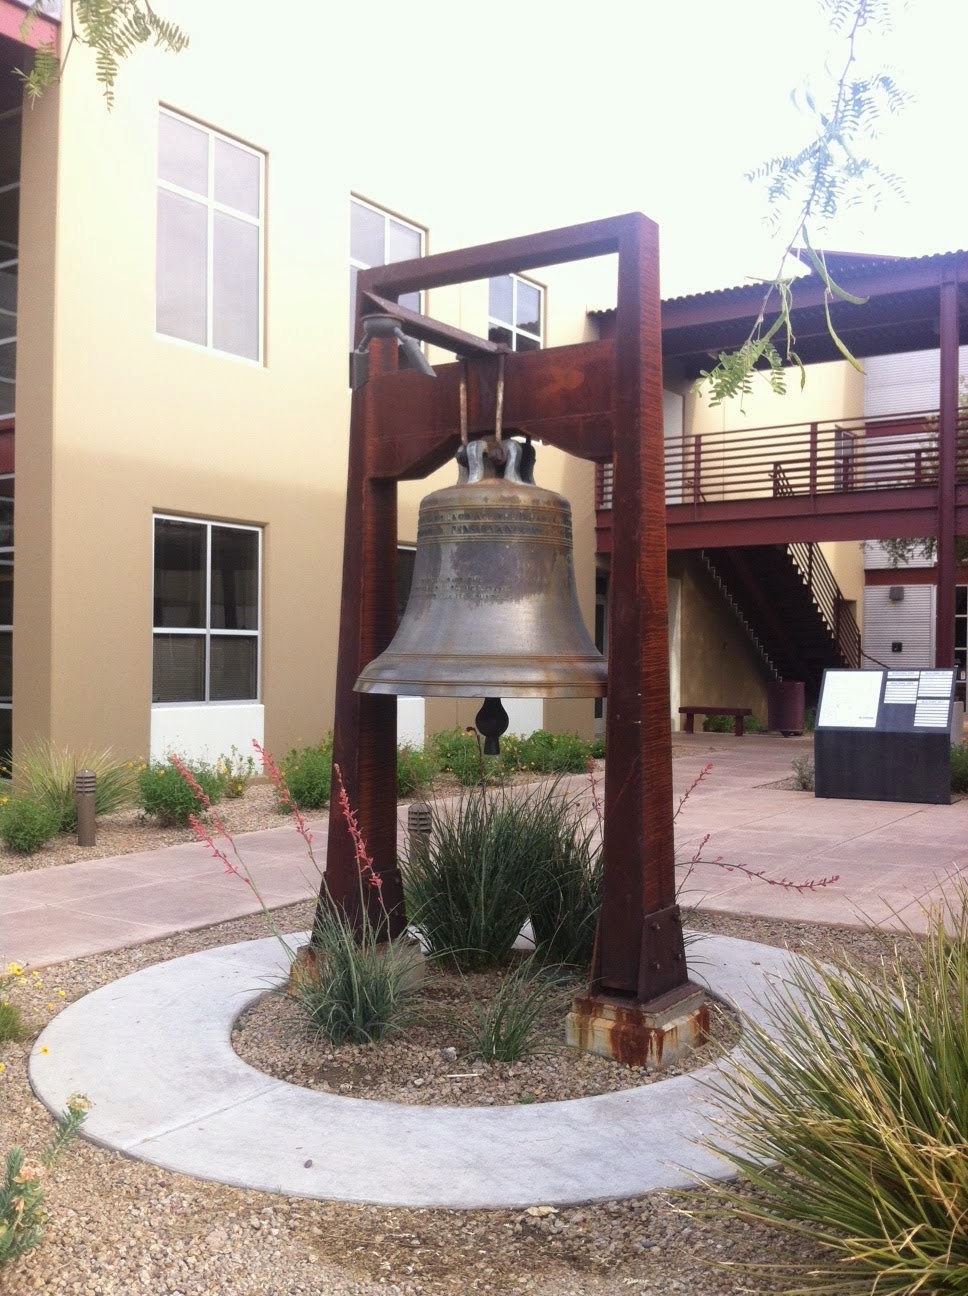 The cattle baron’s bell